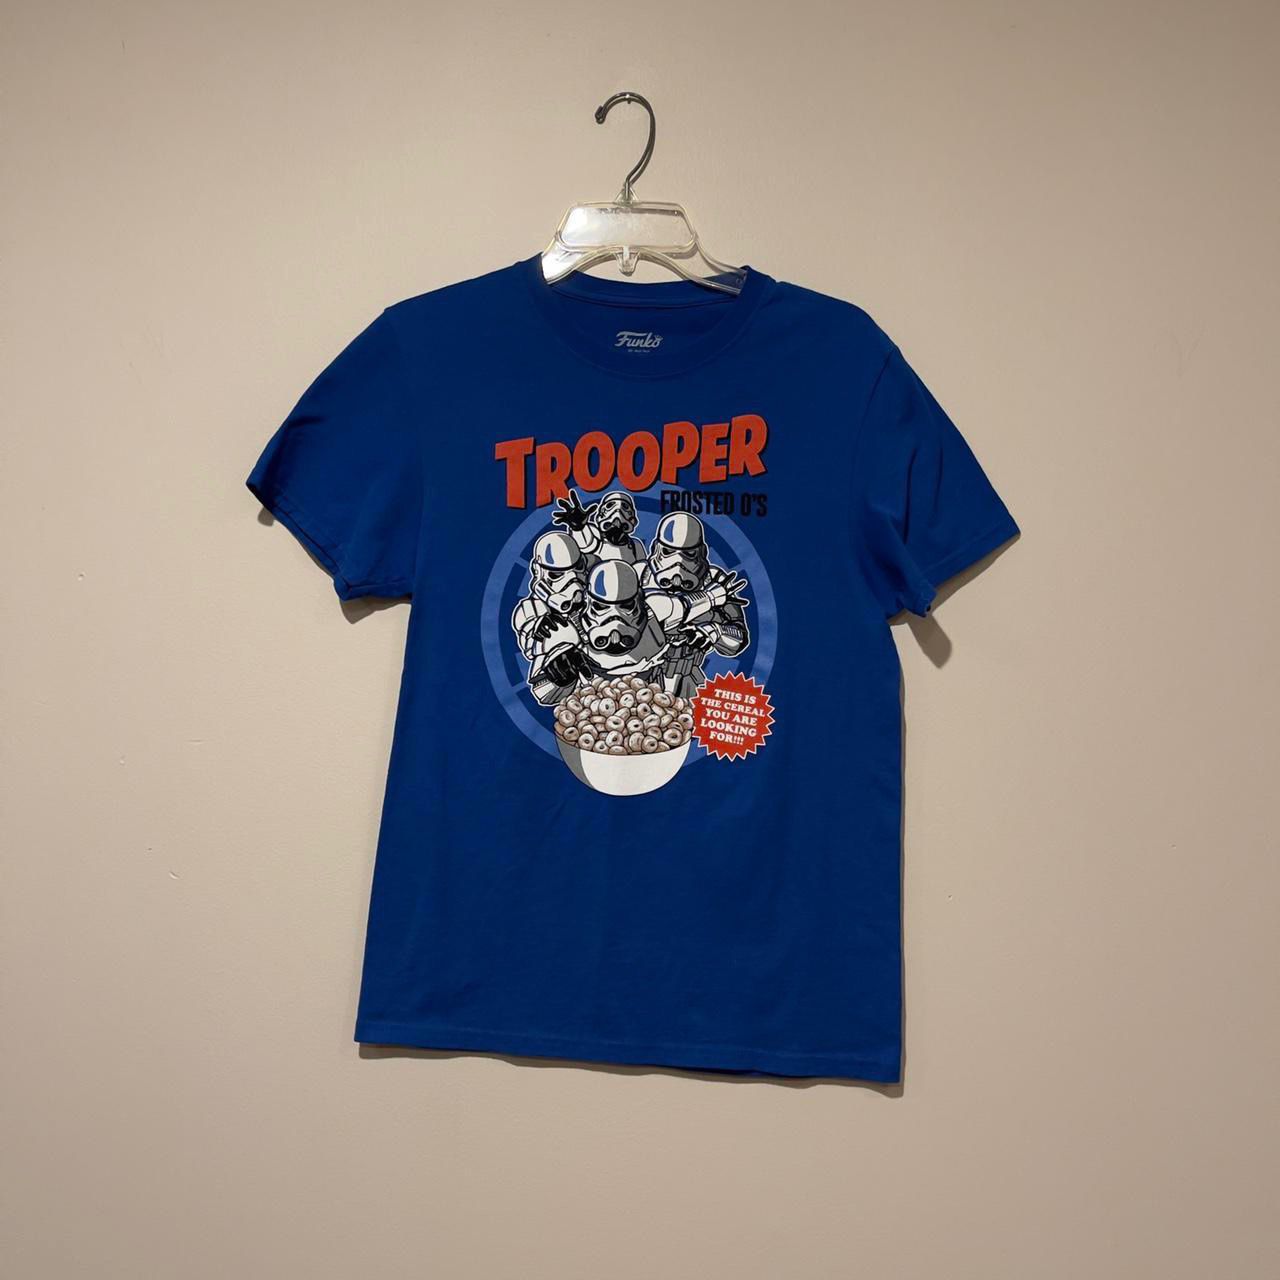 Vintage Blue Star Wars Trooper Frosted O’s Graphic Tee